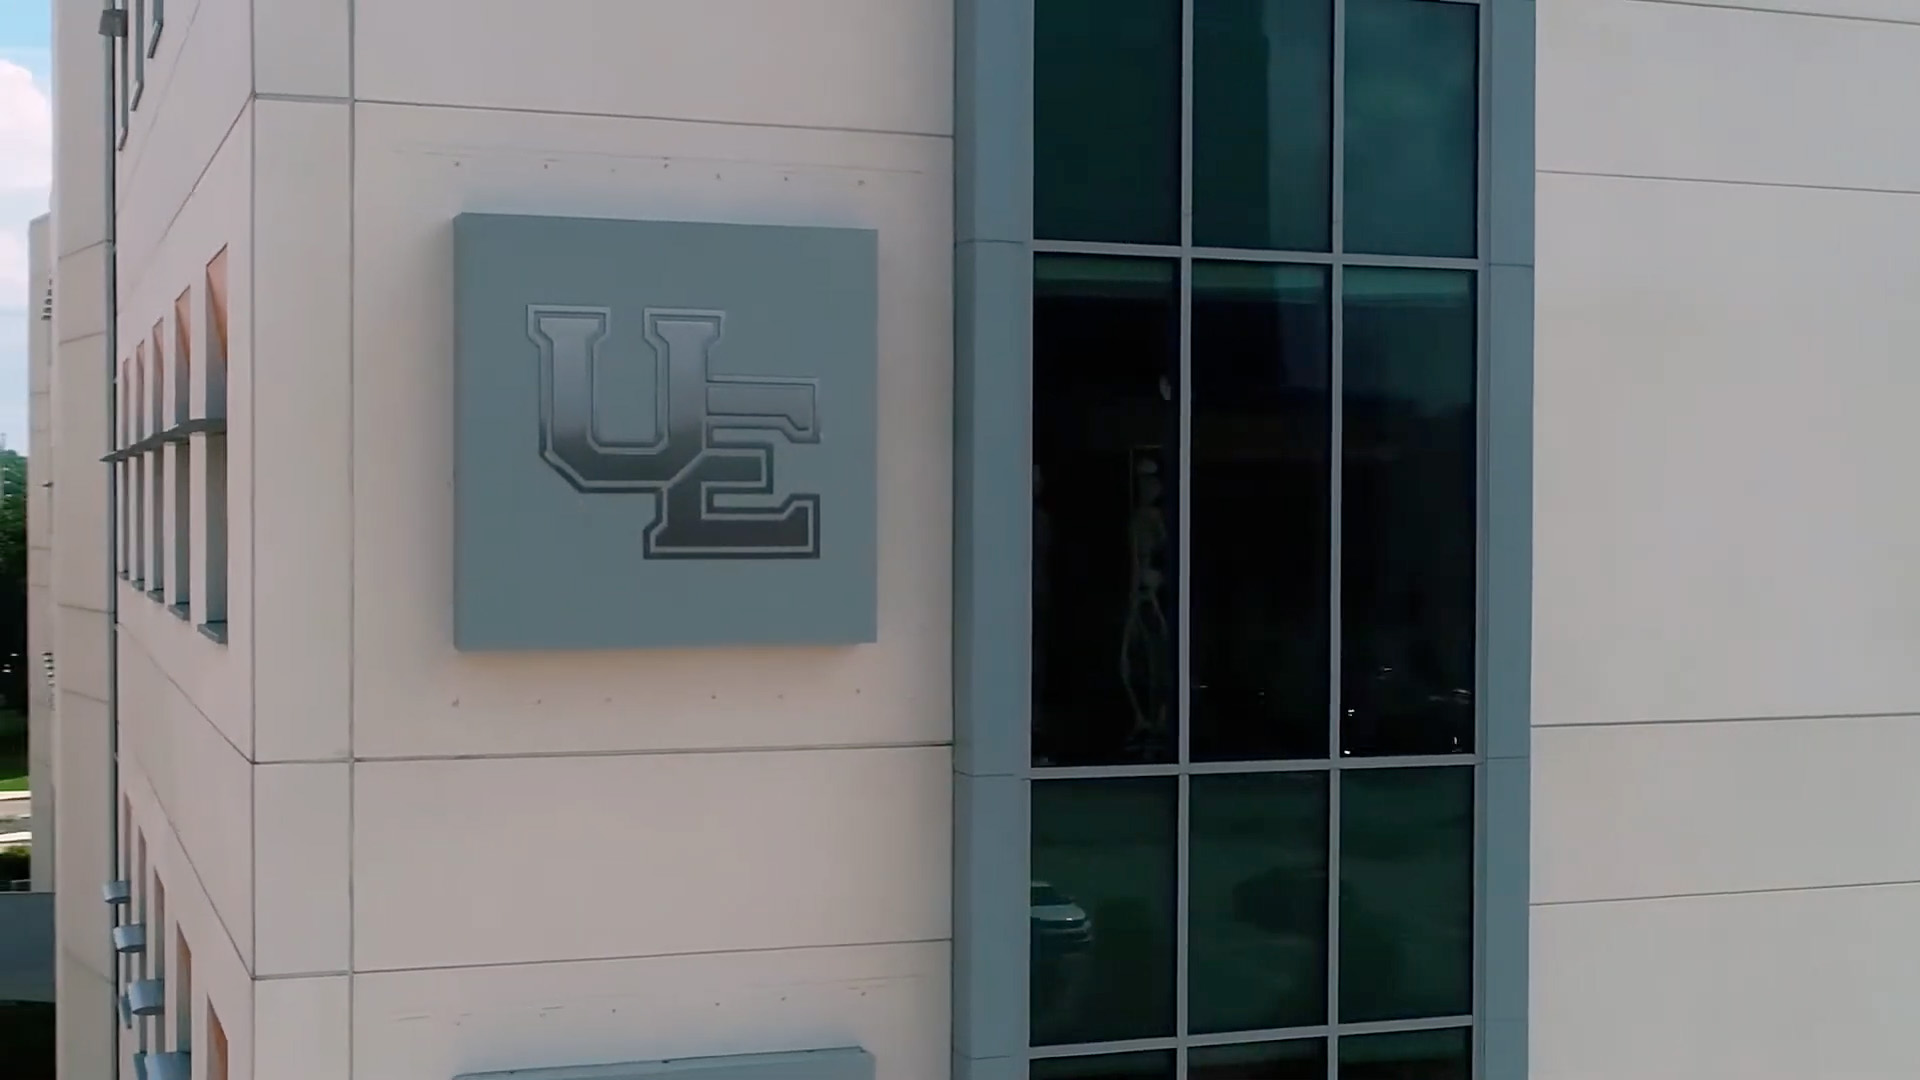 Stone Center UE sign on side of building